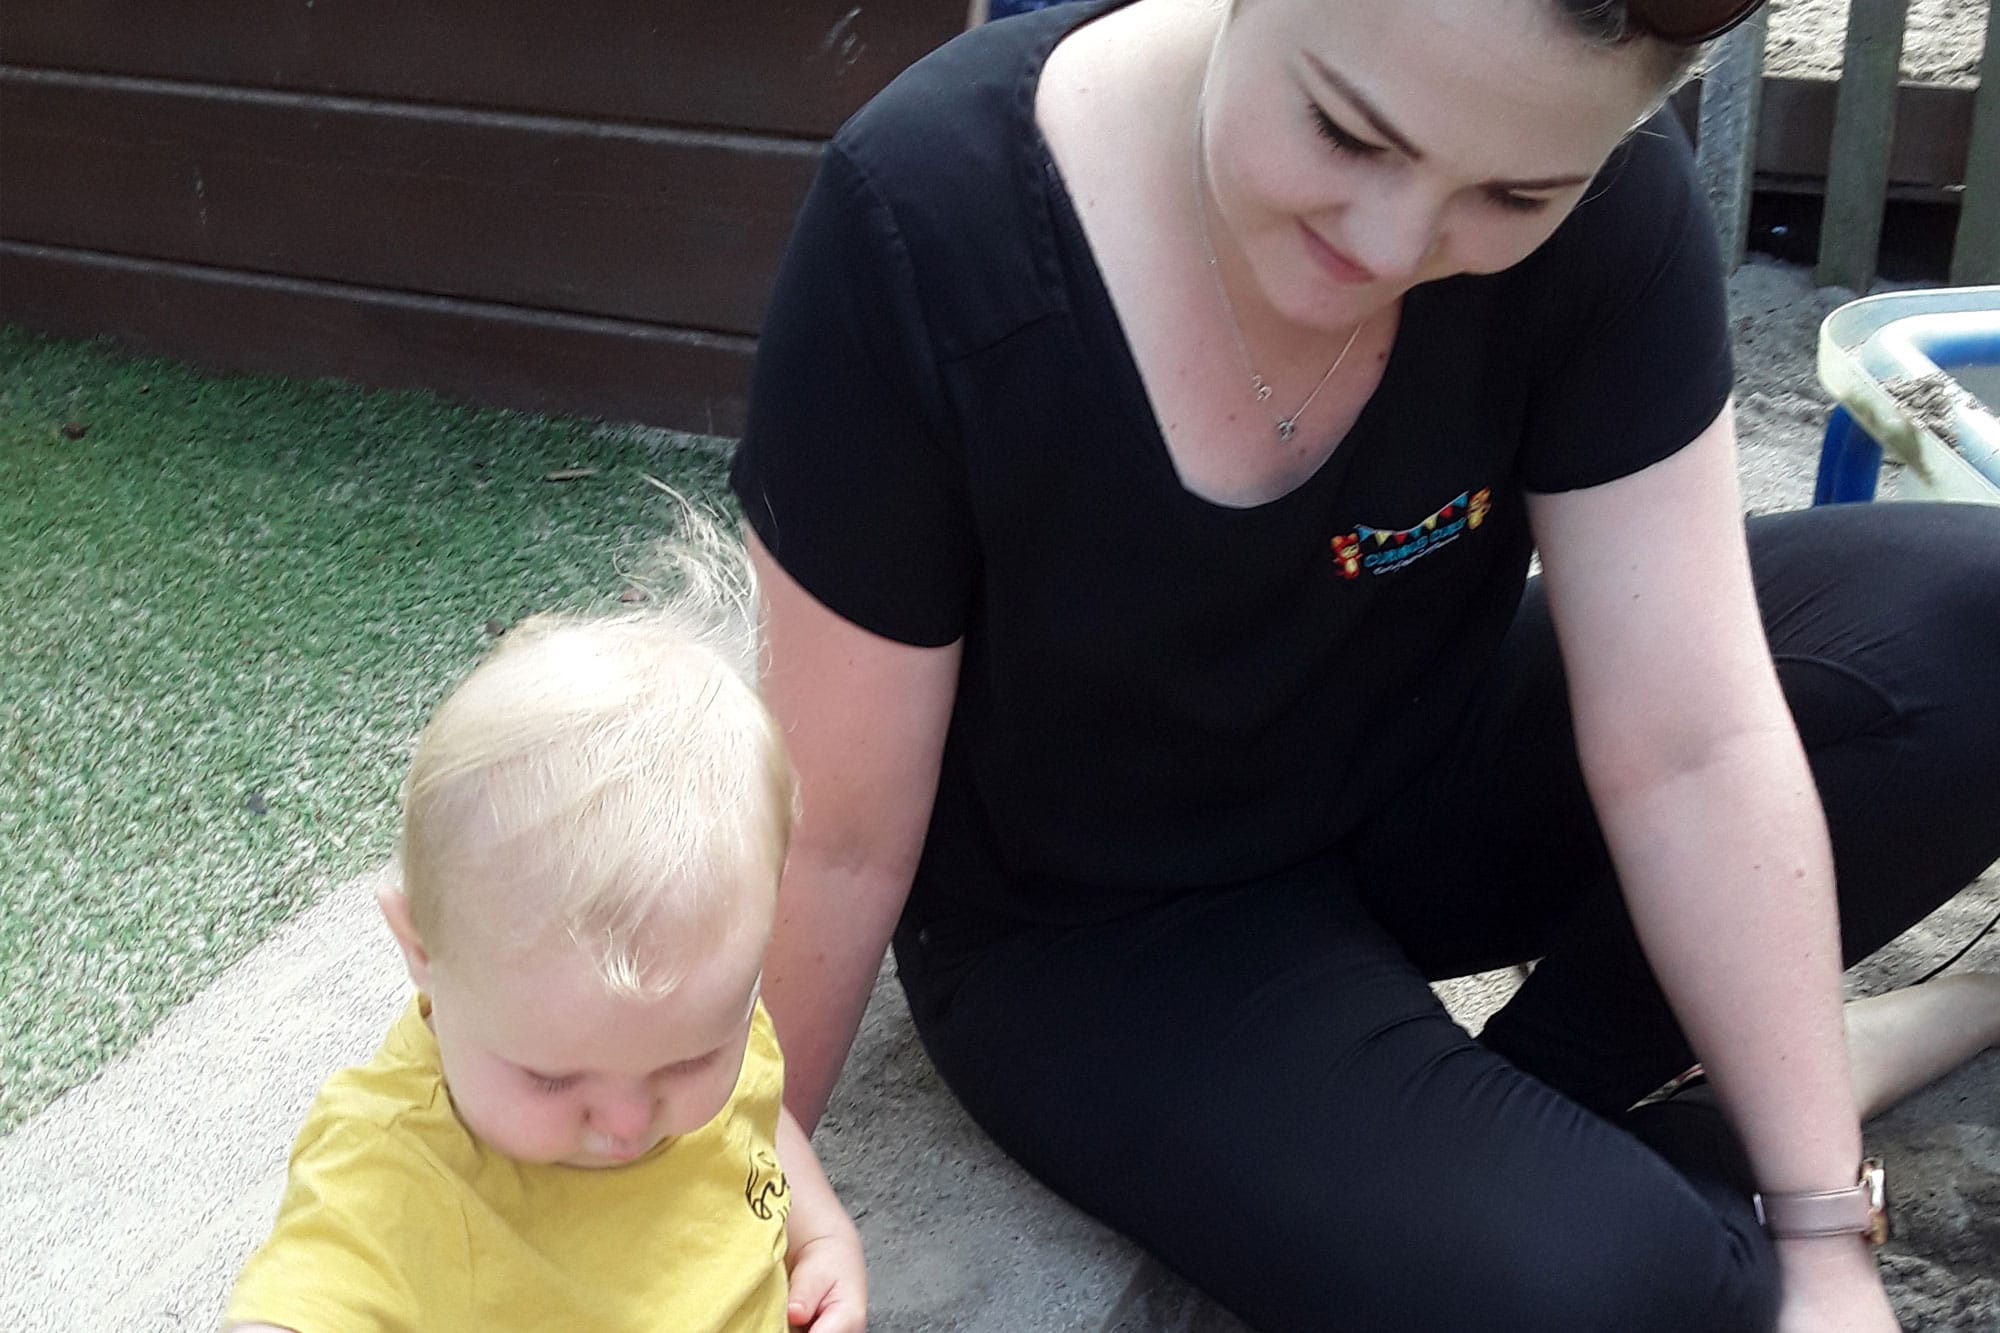 Clarize Fouche – Early Childhood Teacher in Training